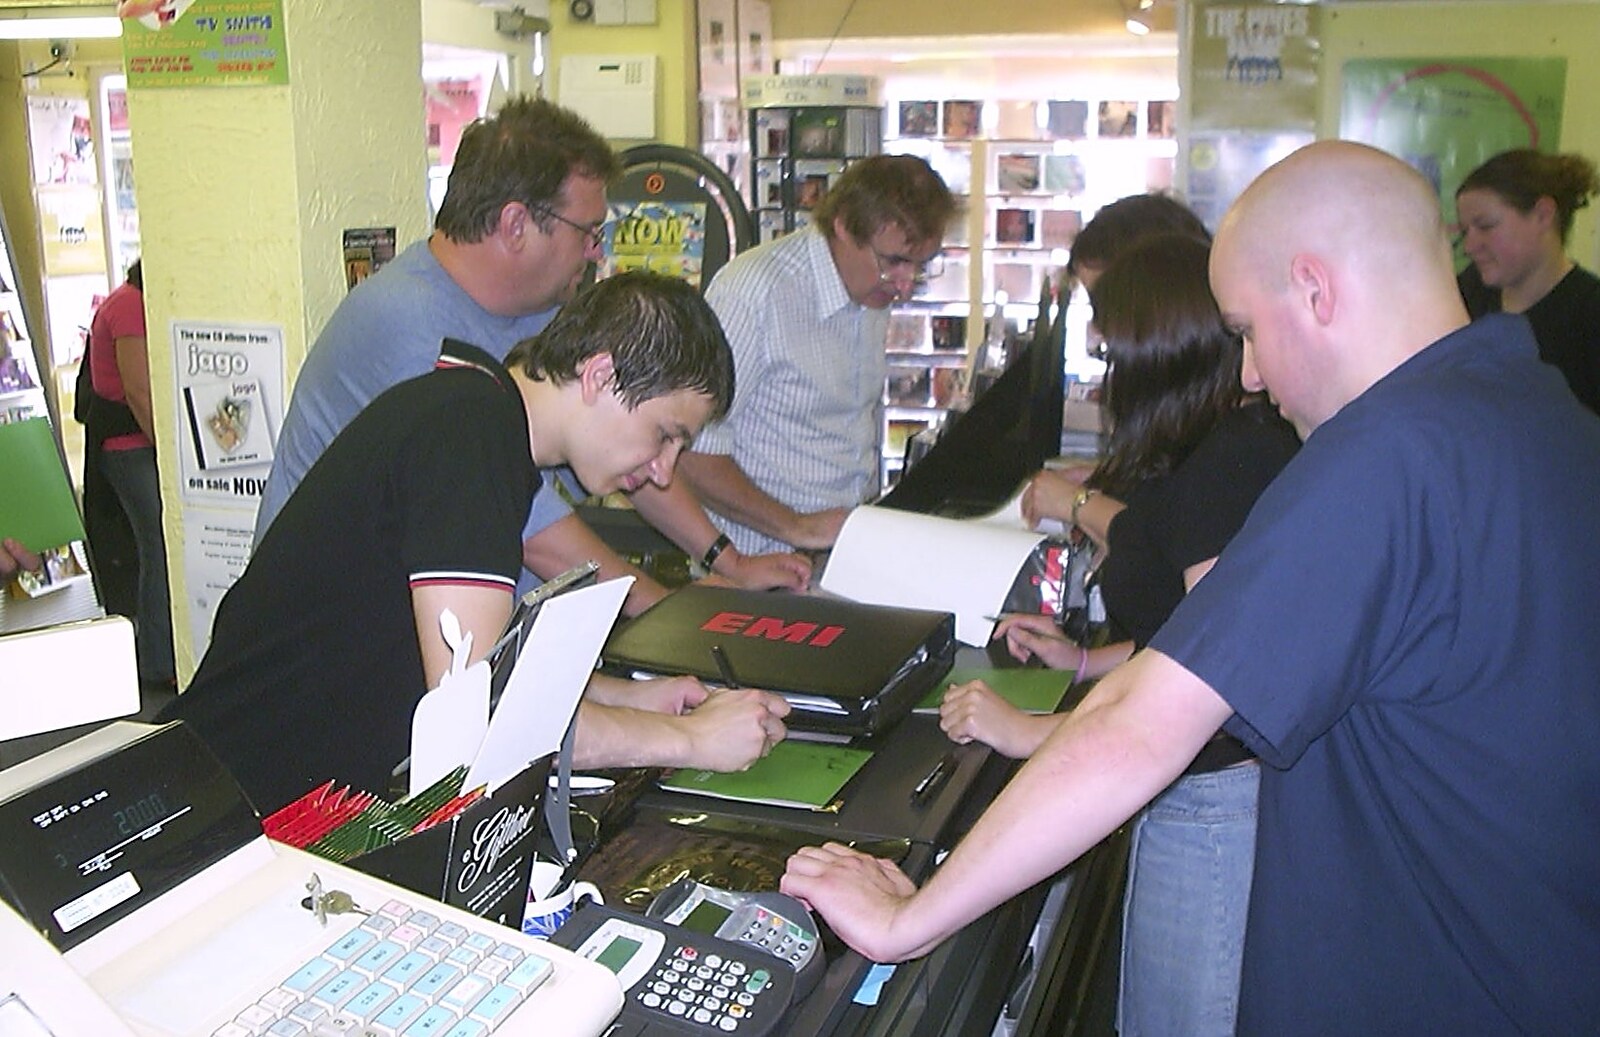 Mark Joseph at Revs, and the BSCC at Hoxne and Wortham - 30th September 2004: More signing